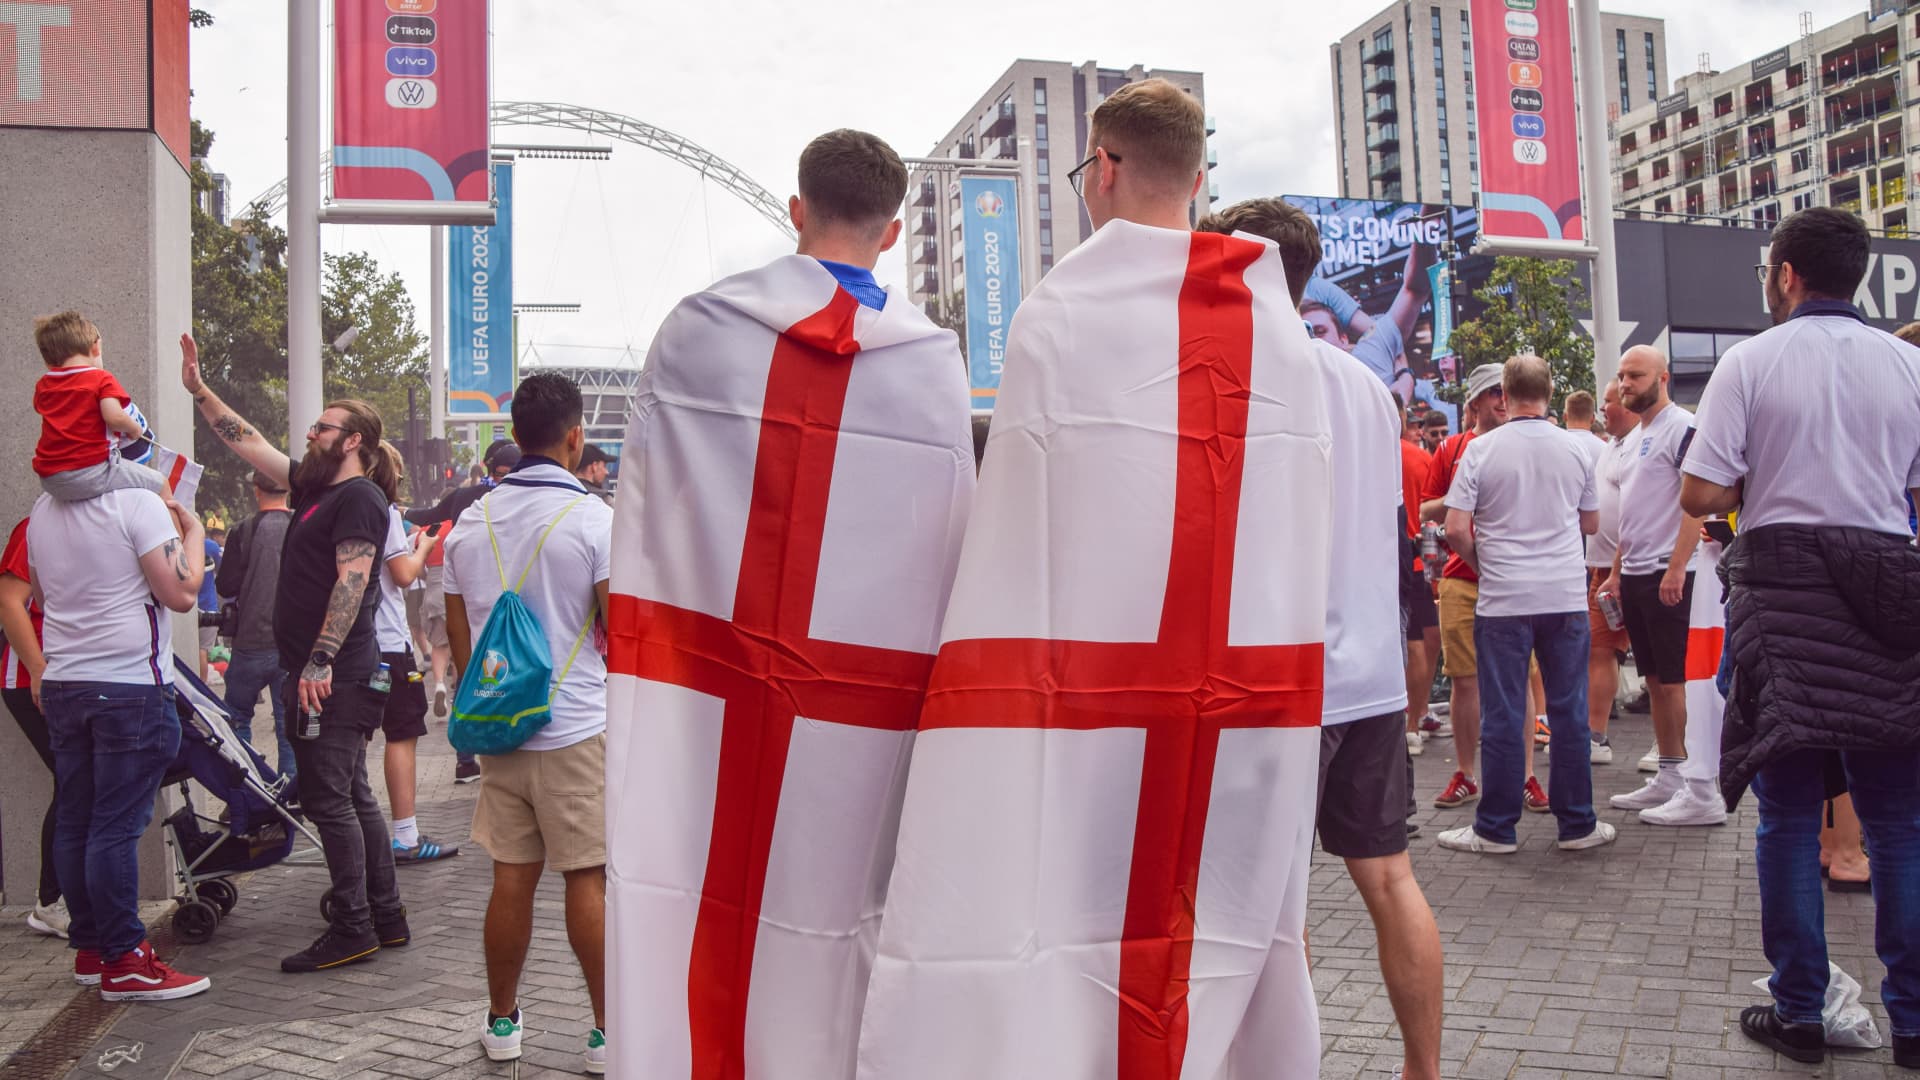 Football fans wrapped in English flags stand outside Wembley Stadium ahead of the England v Italy Euro 2020 final.